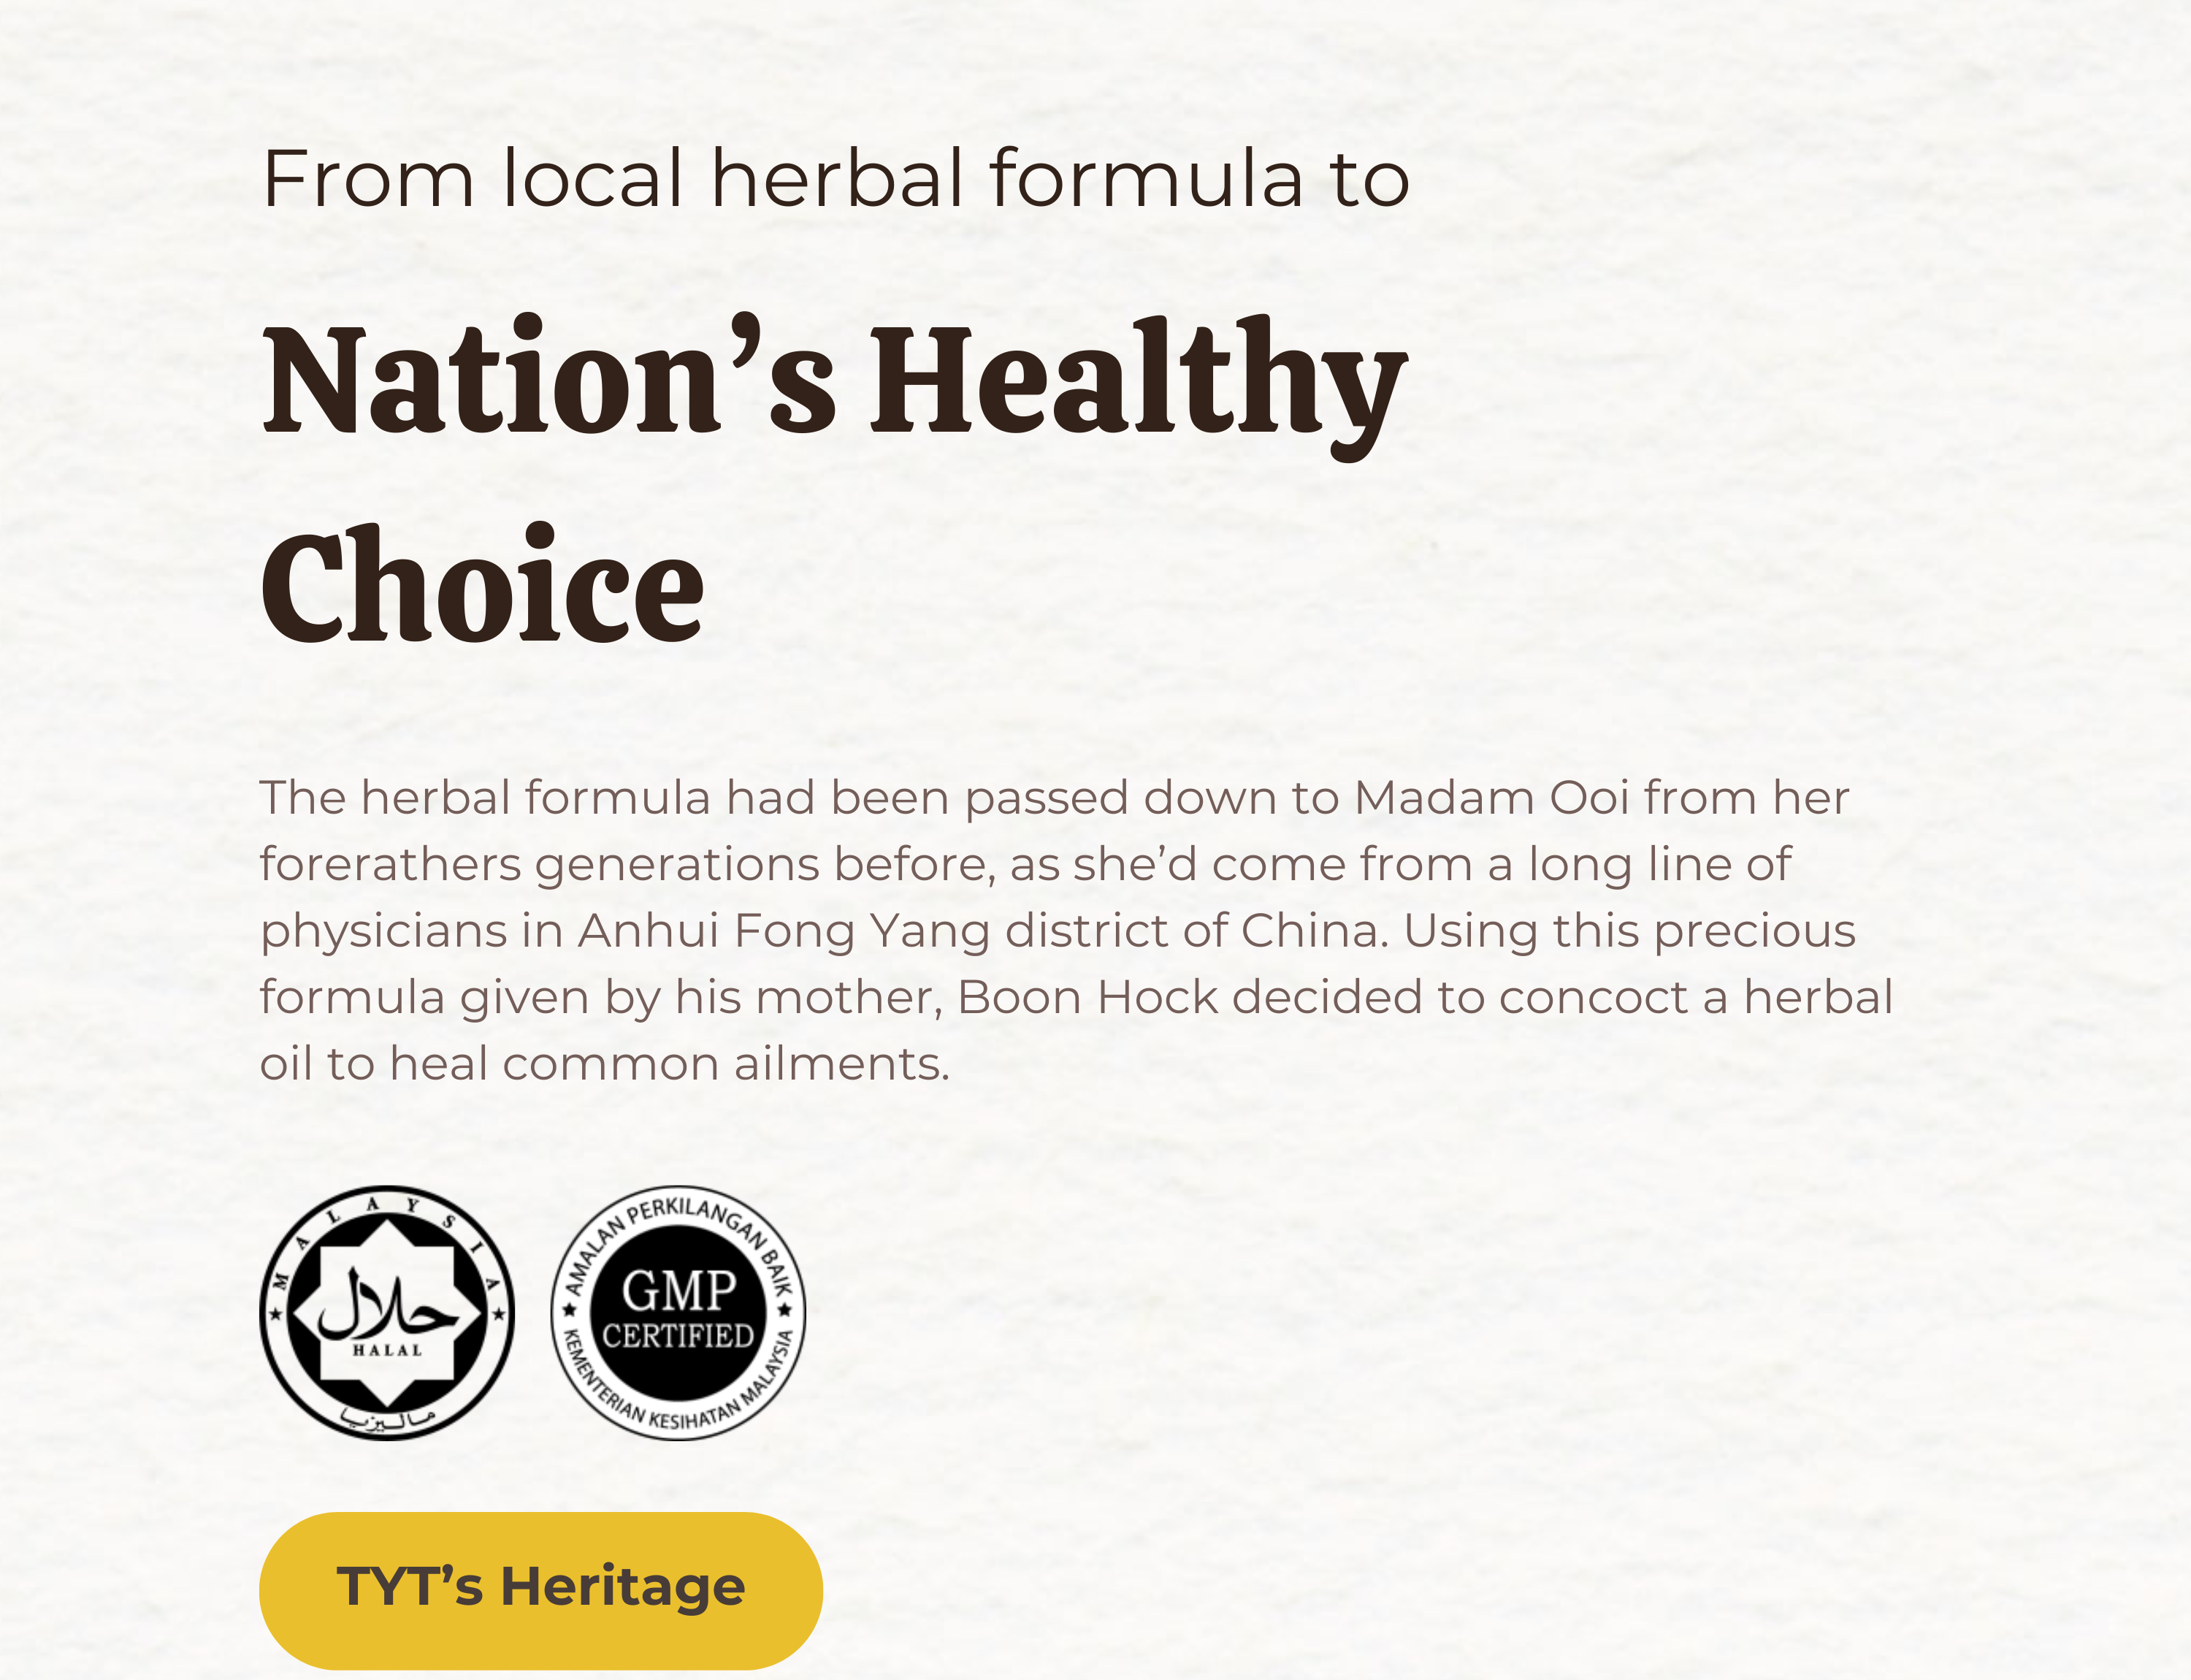 From local herbal formula to nation’s healthy choice, The herbal formula had been passed down to Madam Ooi from her forefathers generations before, as she’d come from a long line of physicians in Anhui Fong Yang disctrict of China.